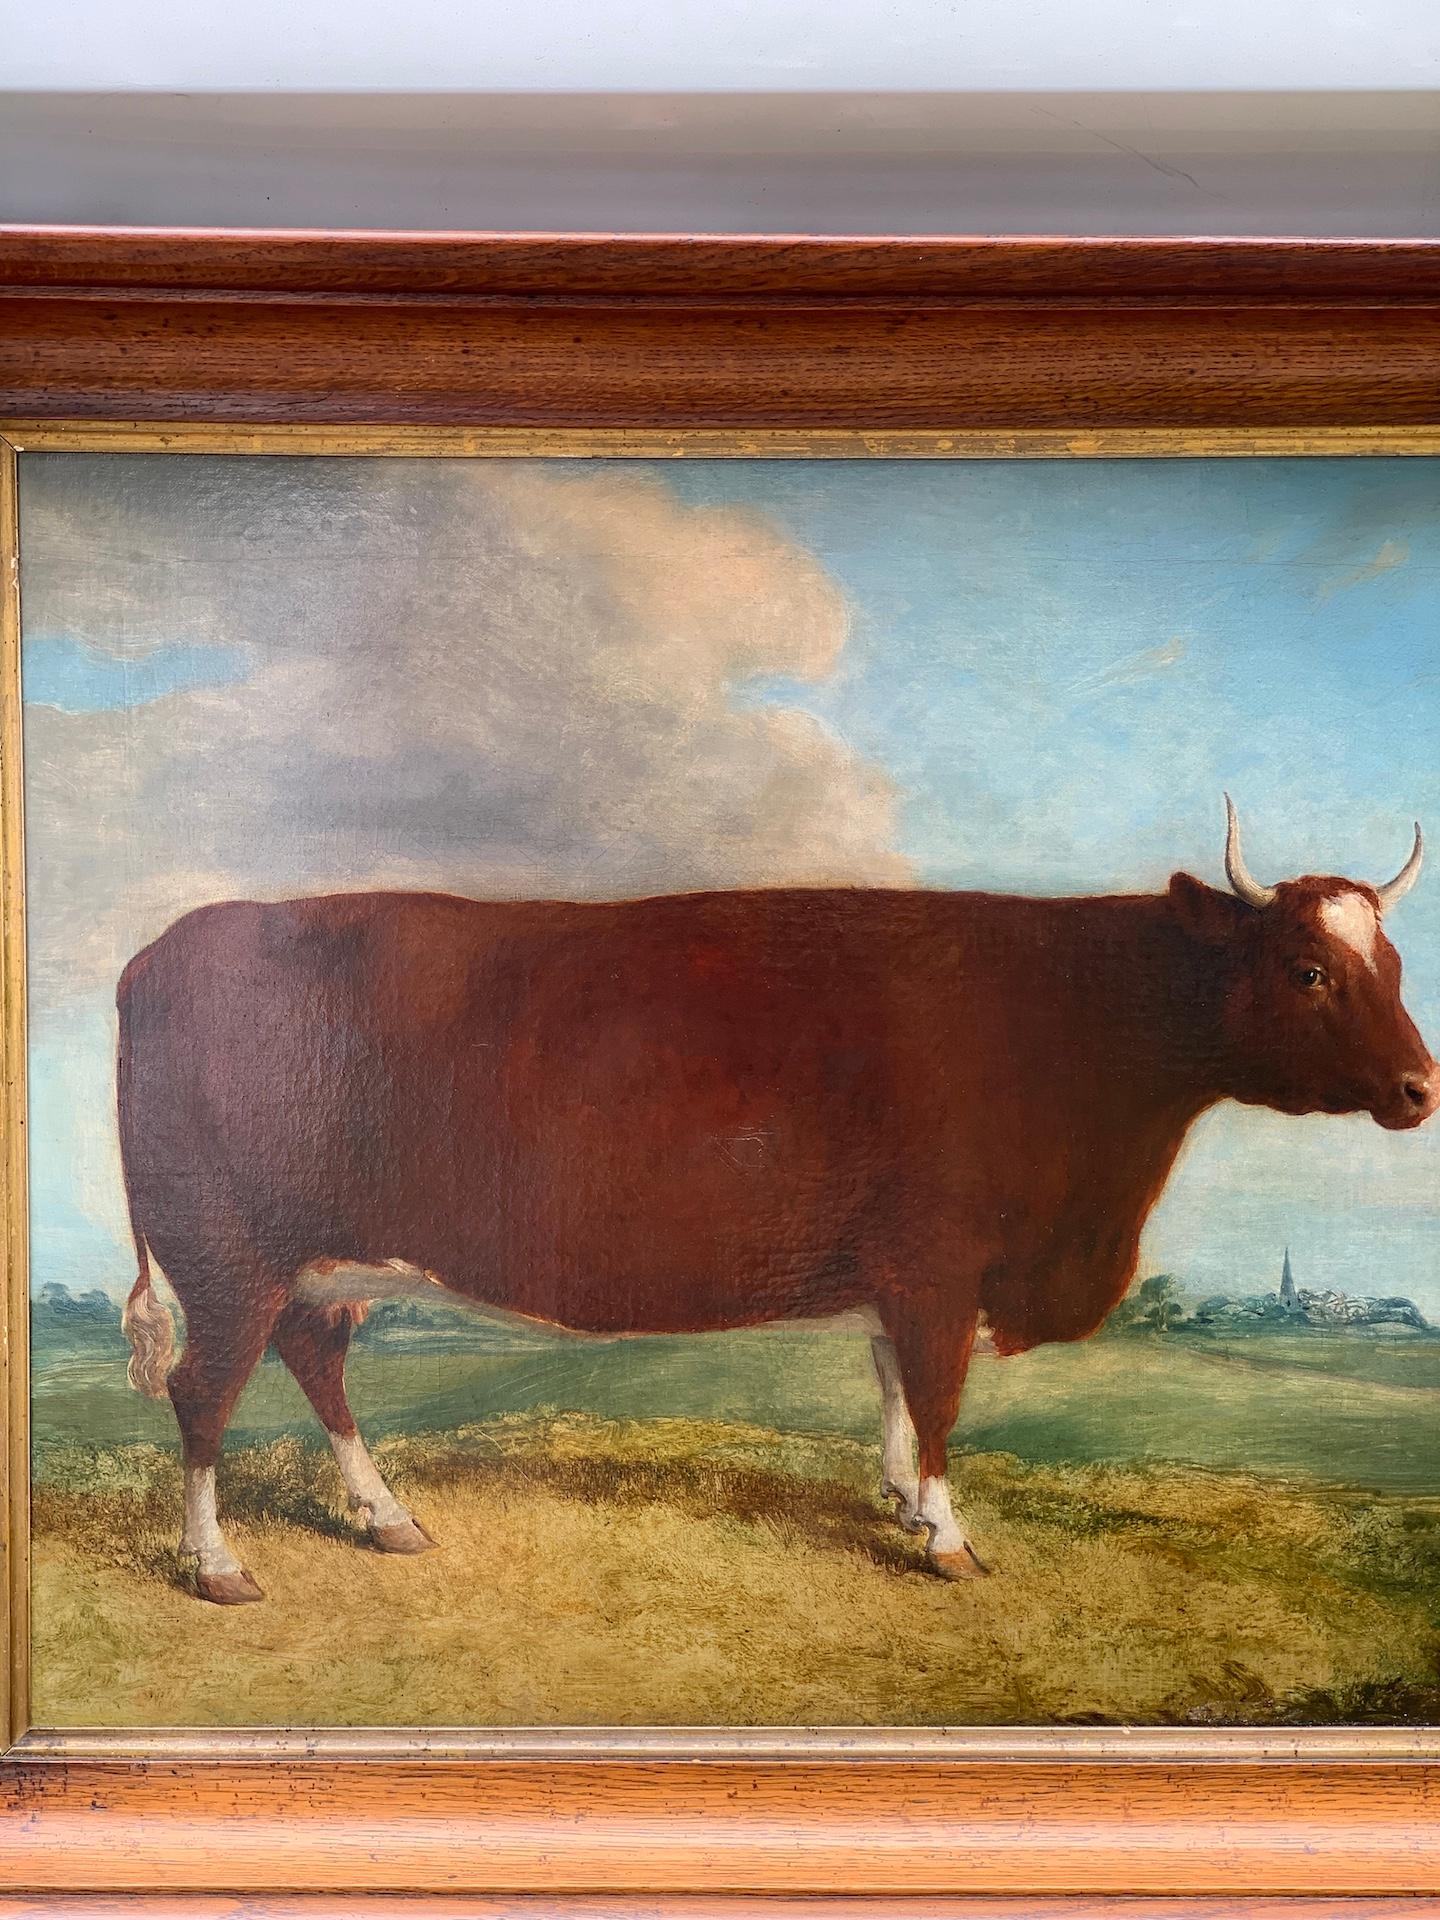 19th century English folk are portrait of a Bull in a landscape  - Painting by John Miles of Northleach